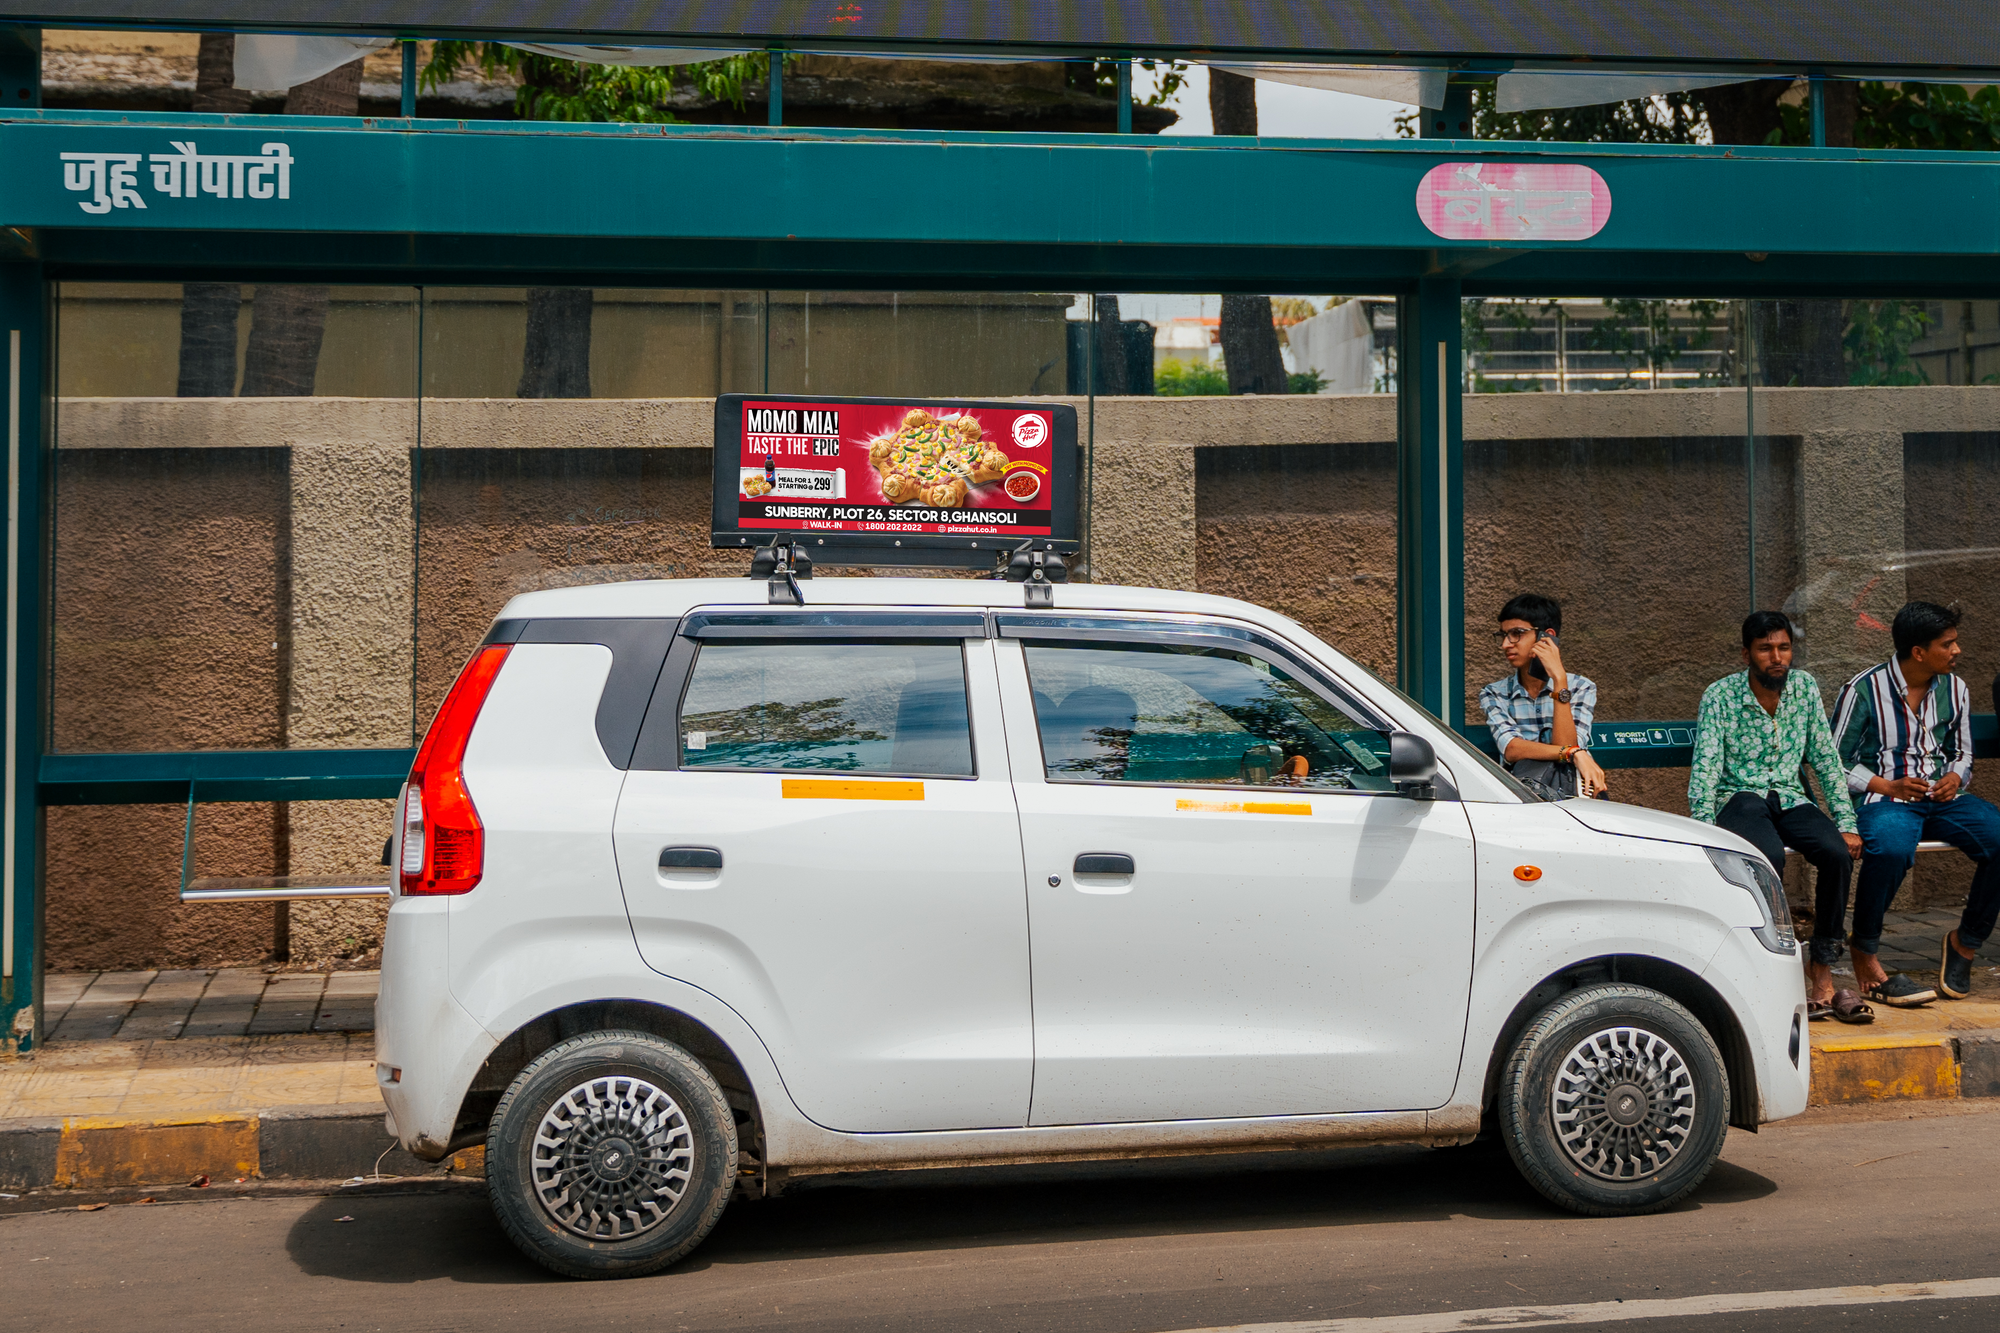 Pizza Hut Taxi Top Creative For Ghansoli promoting Momo Mia